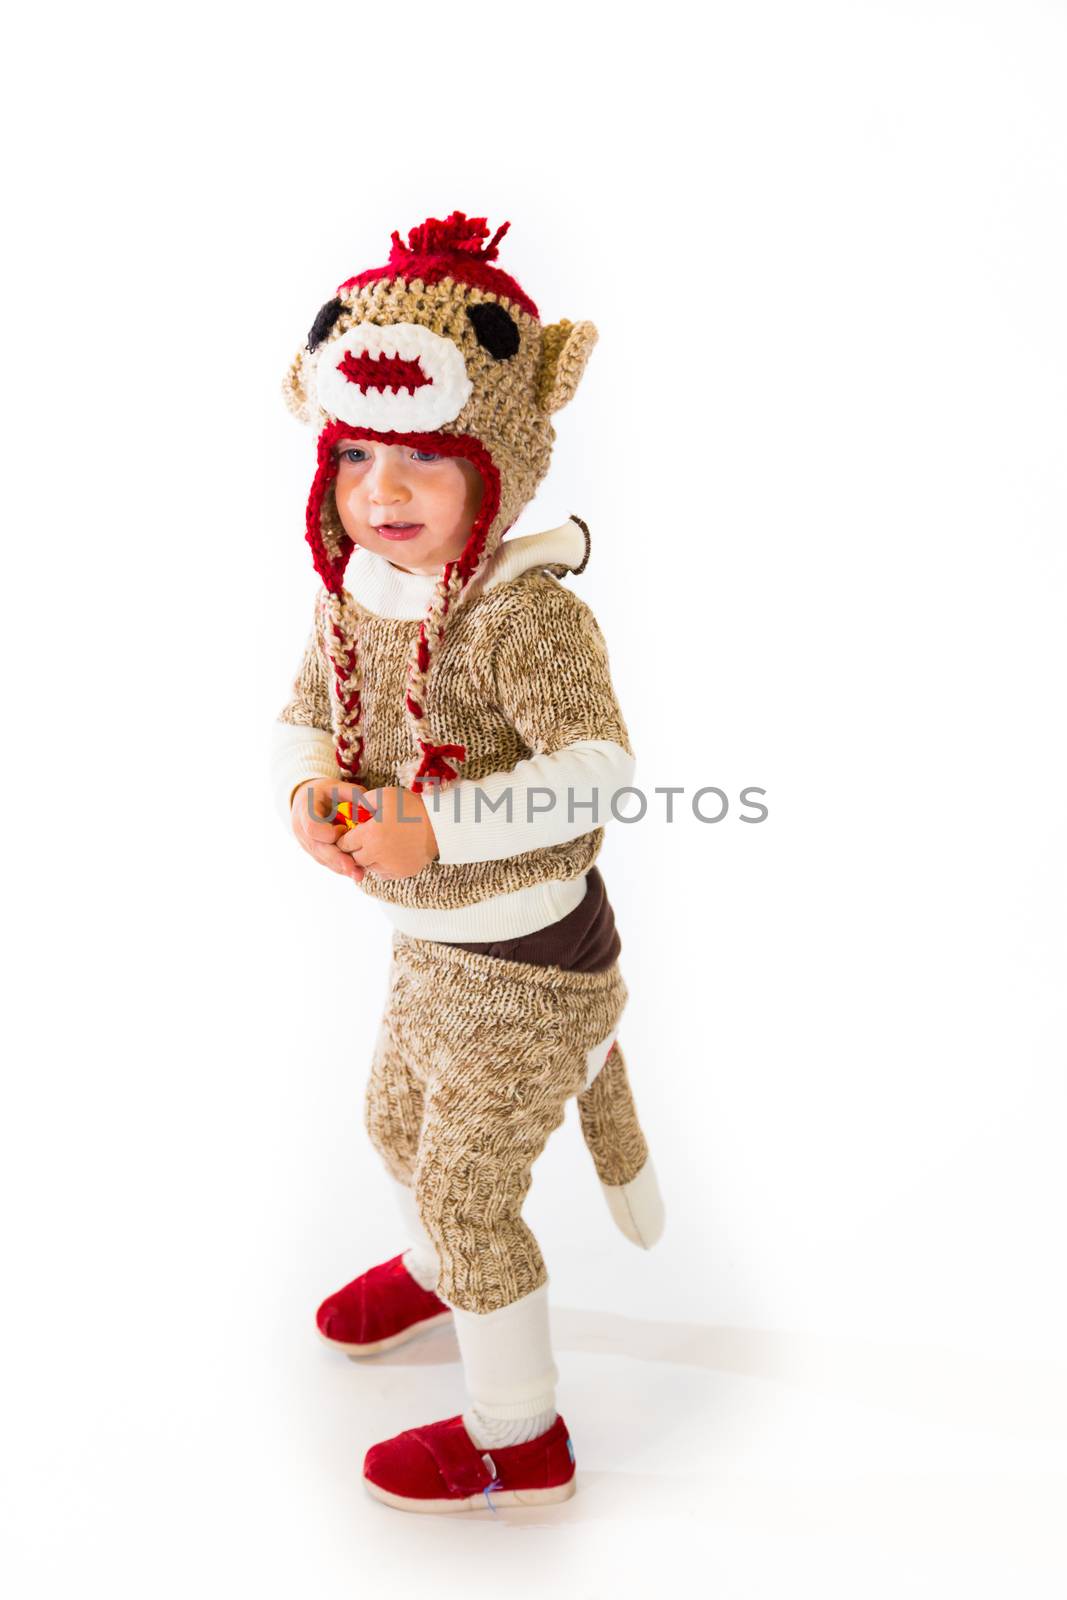 A two year old dressed up in a sock monkey halloween costume and ready to go out and trick-or-treat in the neighborhood for the holiday.